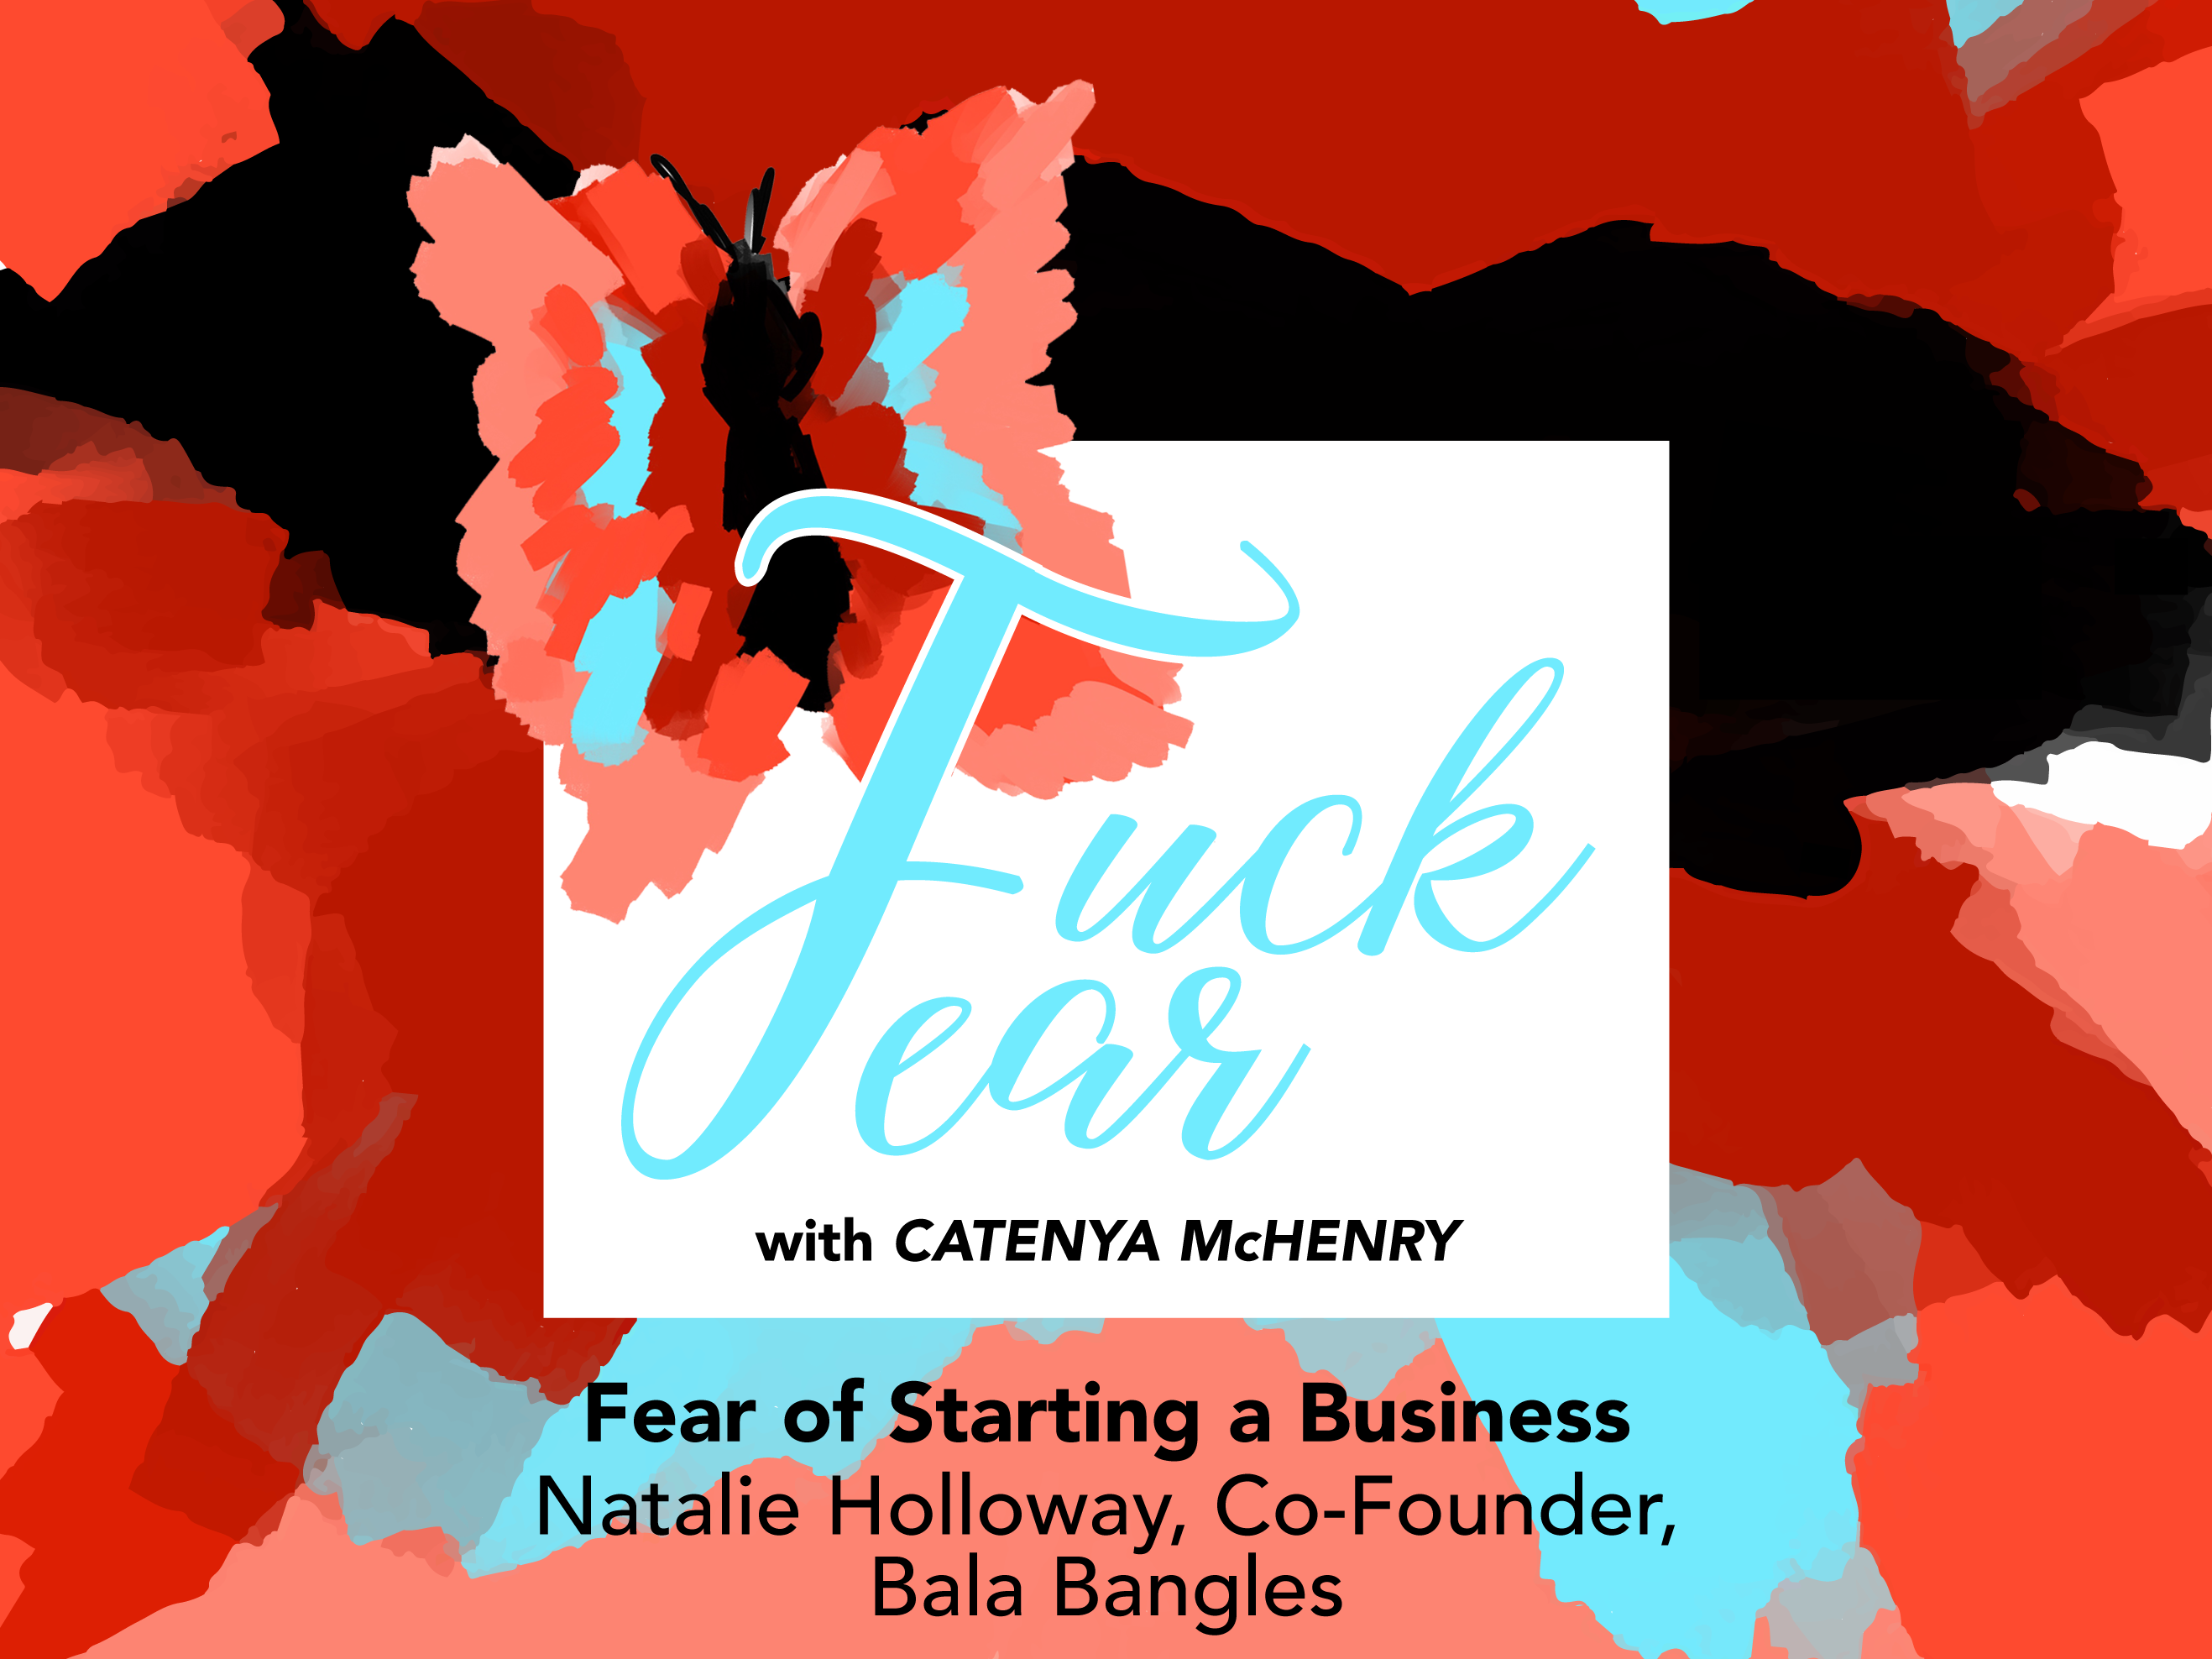 Fear of Starting a New Business with Catenya McHenry and Natalie Holloway